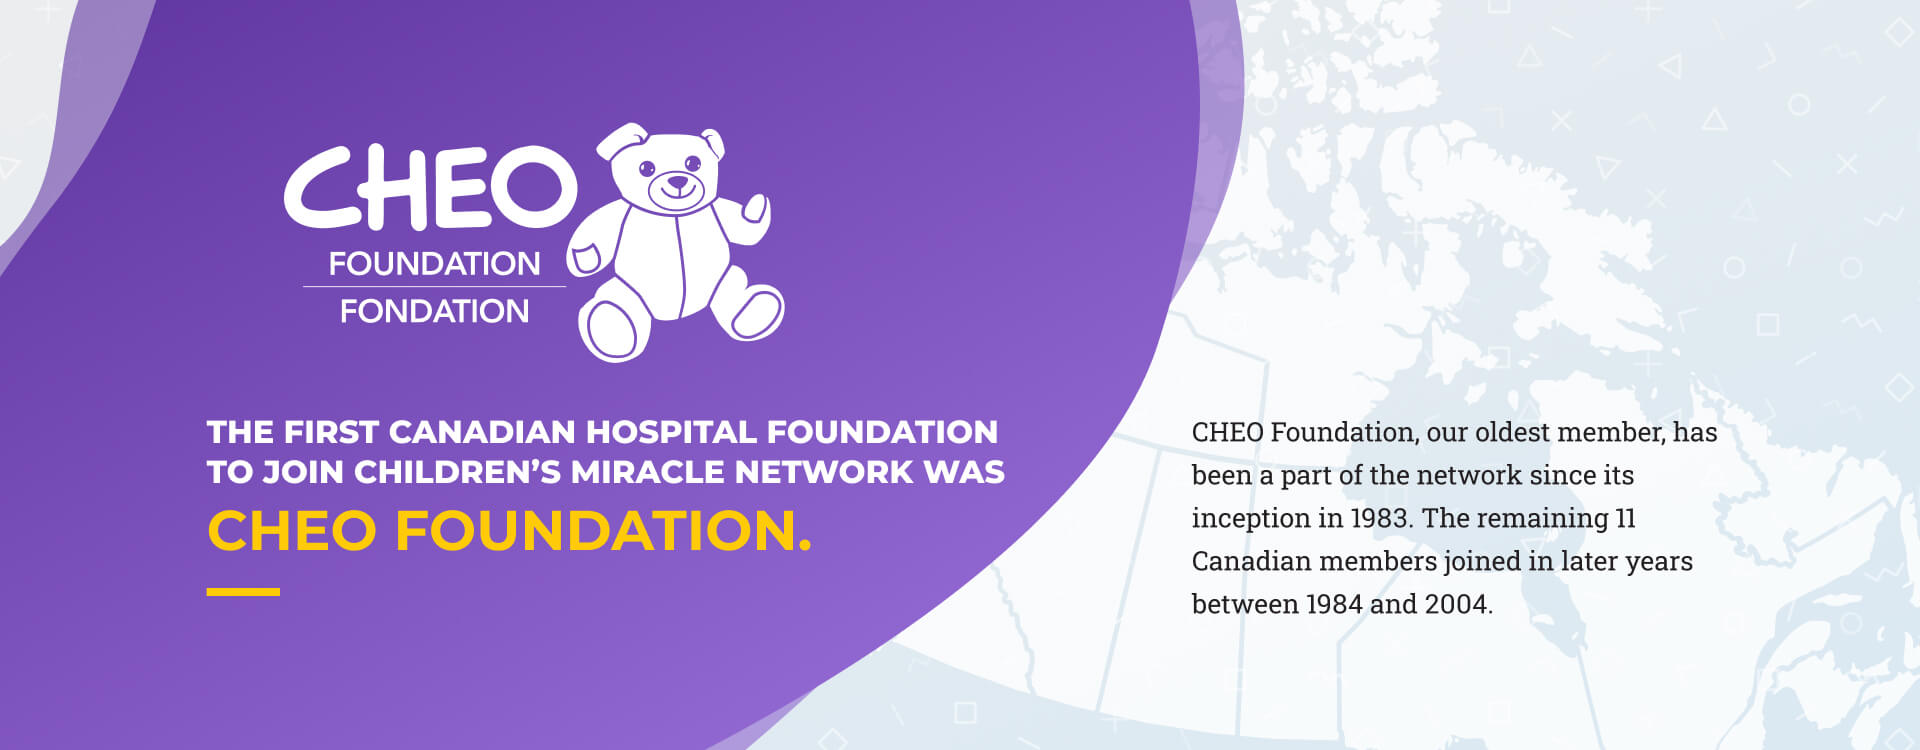 Slide 2 - The first Canadian hospital foundation to join Children’s Miracle Network was CHEO Foundation. CHEO Foundation, our oldest member, has been a part of the network since its inception in 1983. The remaining 11 Canadian members joined in later years between 1984 and 2004.